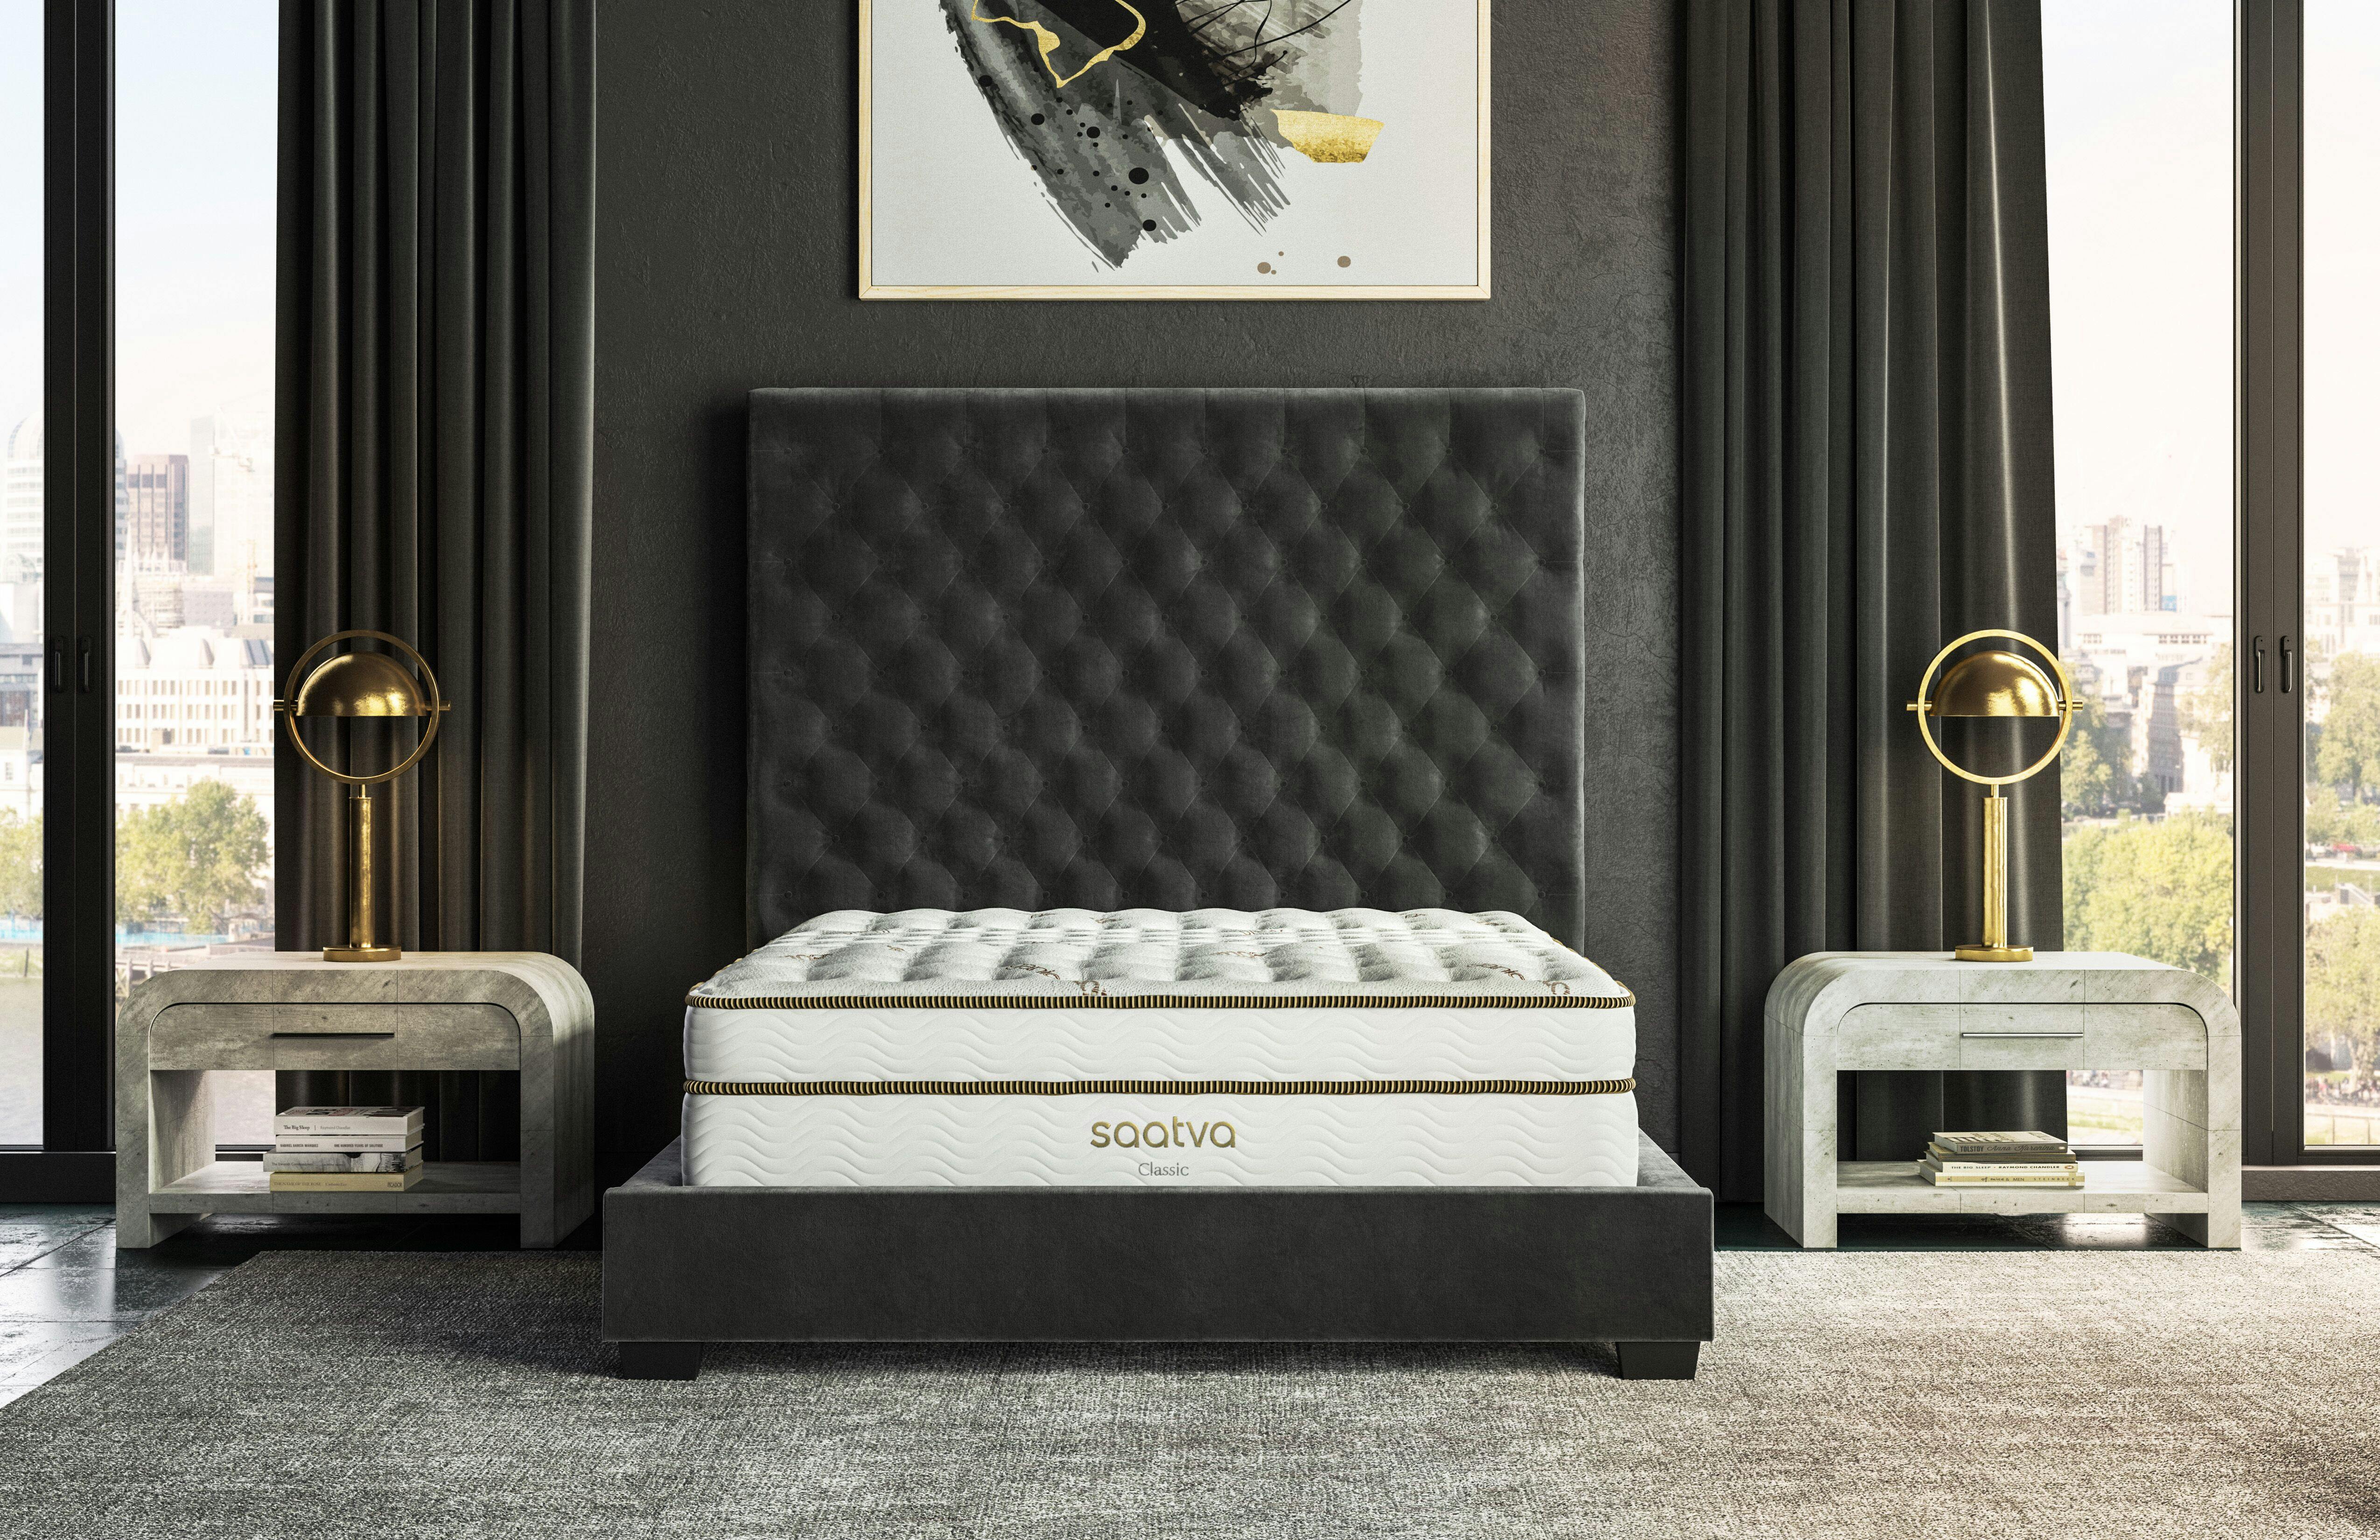 Saatva's chiropractor approved Classic Innerspring mattress in an elegant apartment.